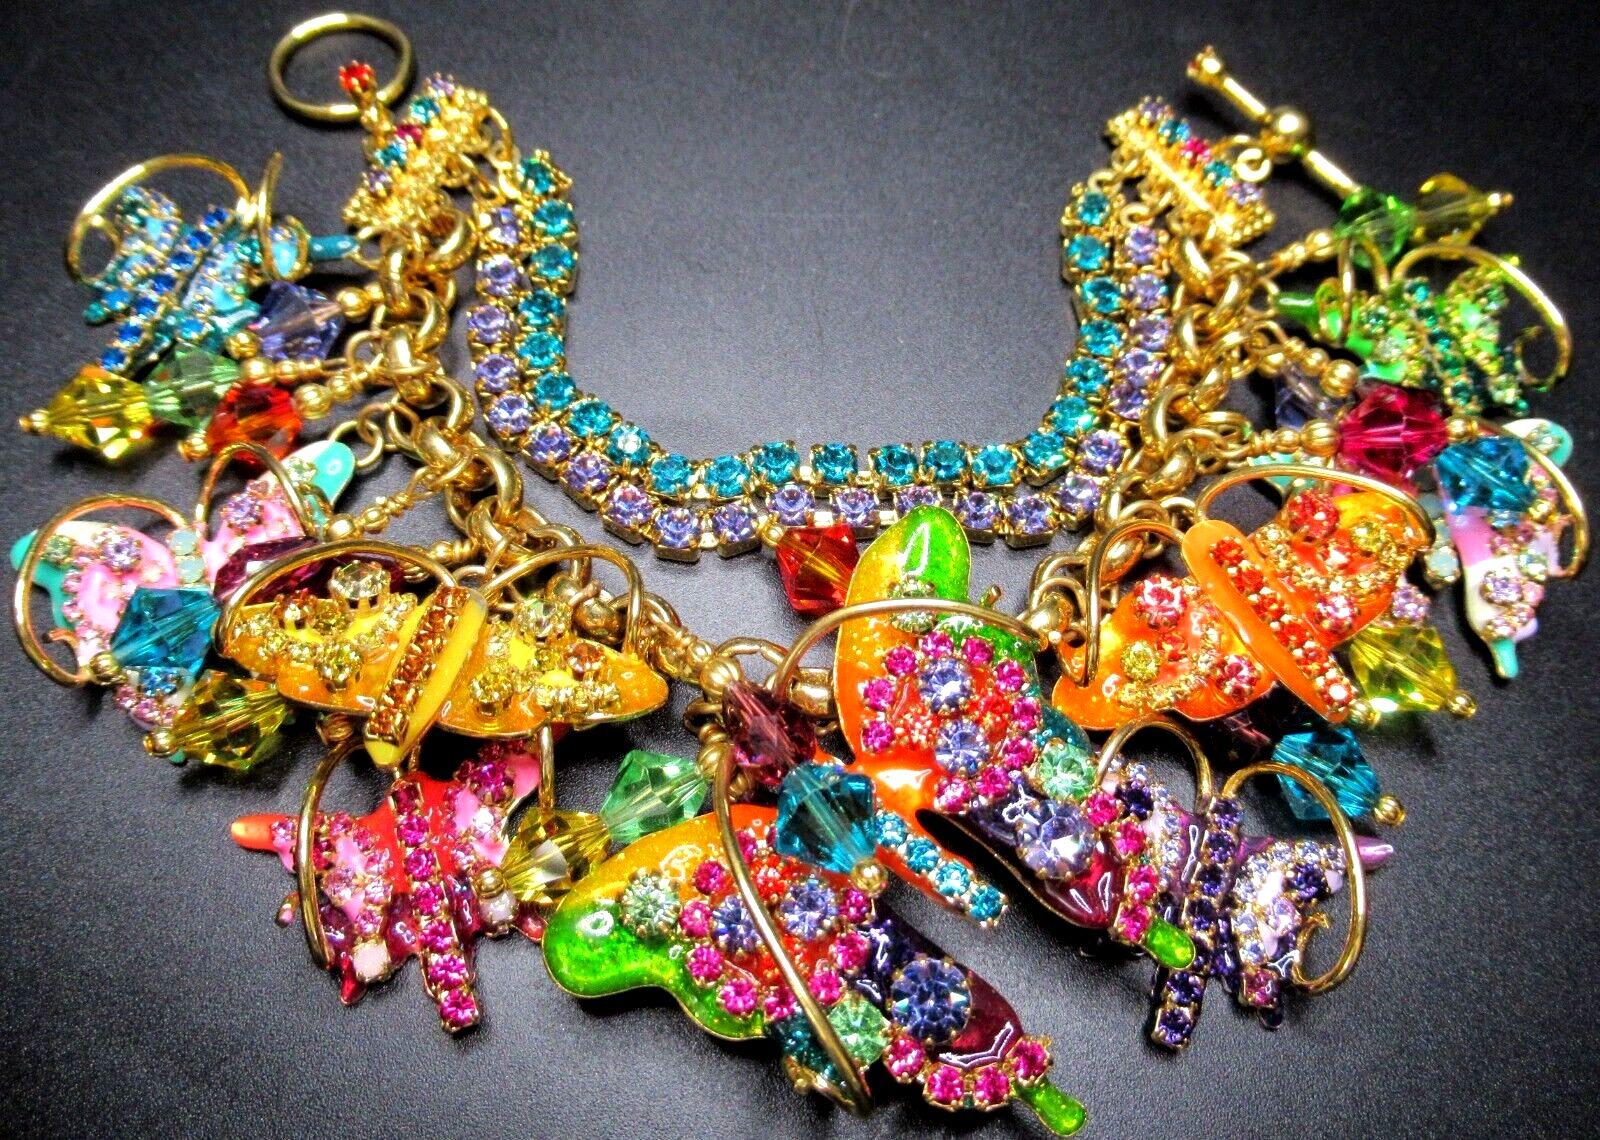 Simply Beautiful! Oscar worthy Iconic LUNCH AT THE RITZ Signed Designer Sparkling Crystal and Enamel Metamorphosis Butterflies Show Stopper Charm Bracelet. Double row Crystal Bracelet, suspending numerous Sparkling Crystal Butterflies. Gold tone